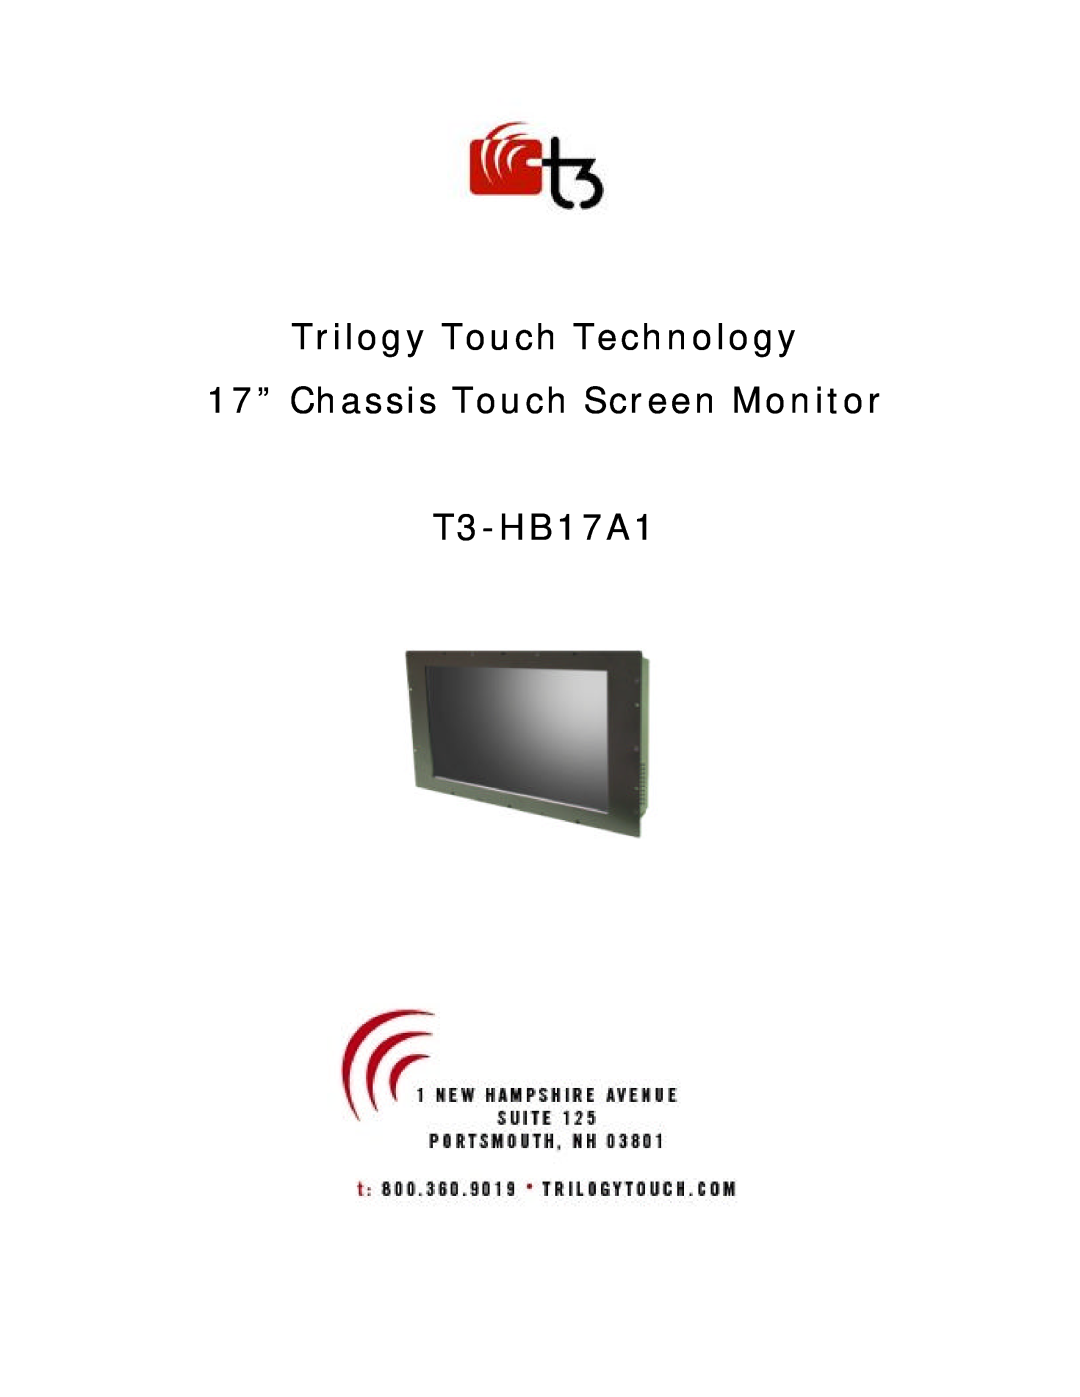 Trilogy Touch Technology manual Trilogy Touch Technology 17” Chassis Touch Screen Monitor T3-HB17A1 